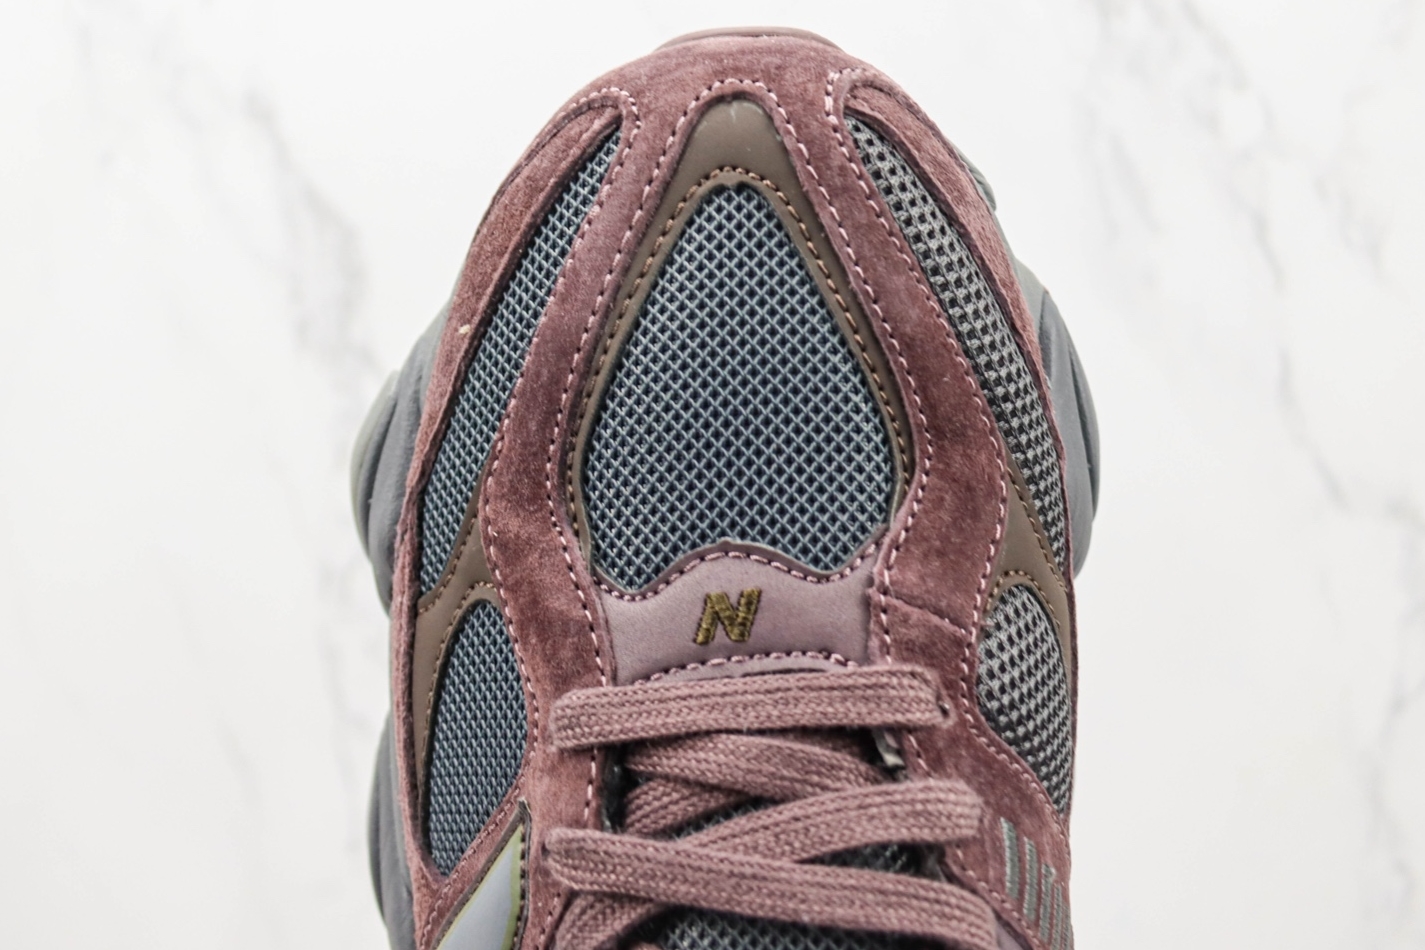 New Balance 9060 Truffle Magnet Rich Earth - Superior Style and Comfort